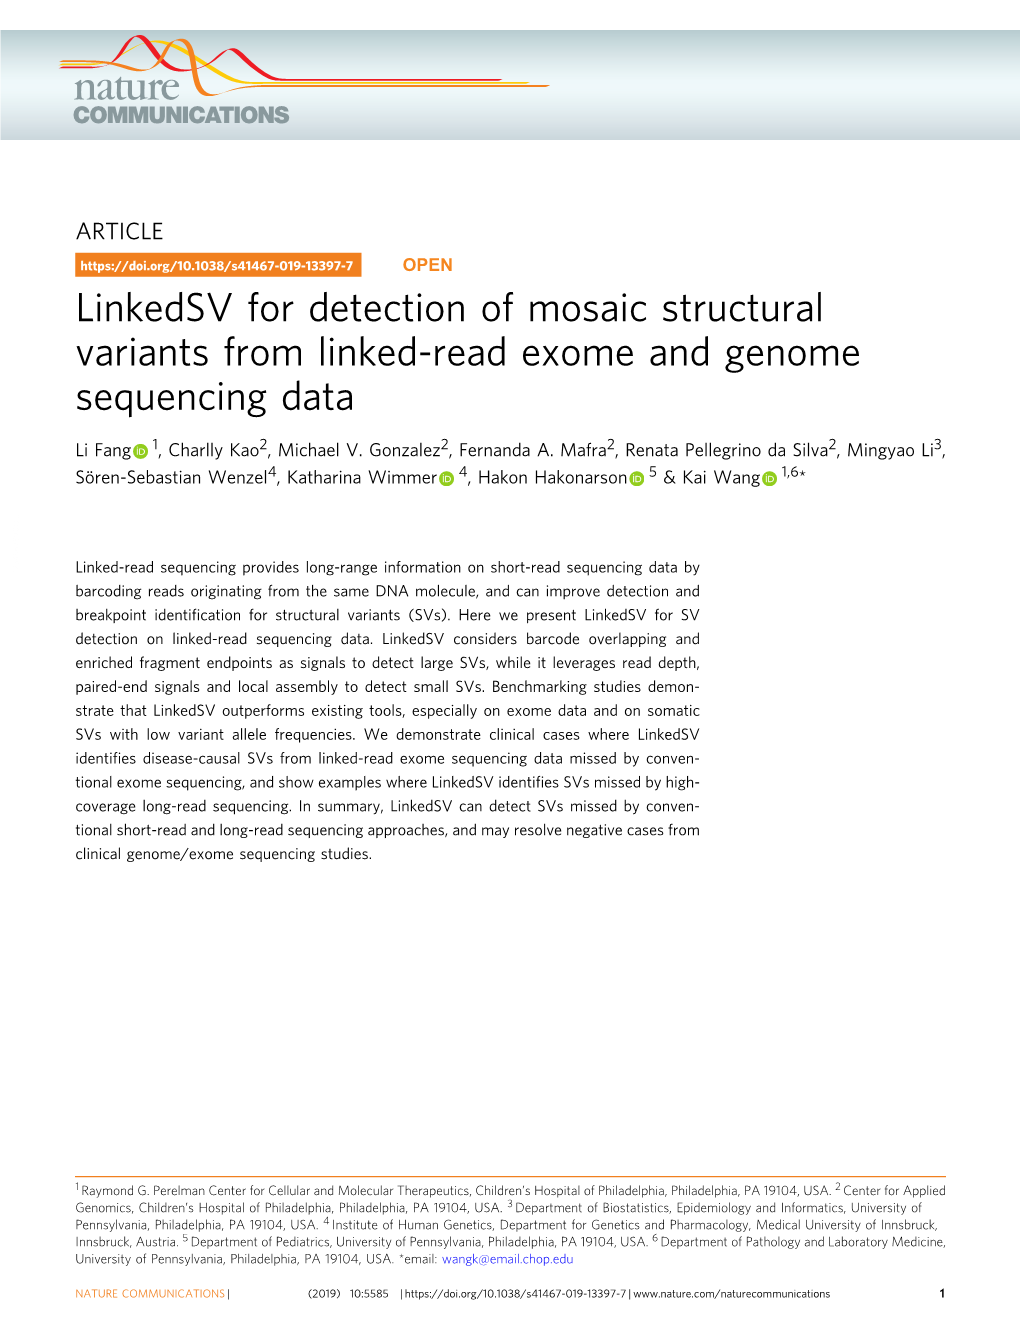 Linkedsv for Detection of Mosaic Structural Variants from Linked-Read Exome and Genome Sequencing Data